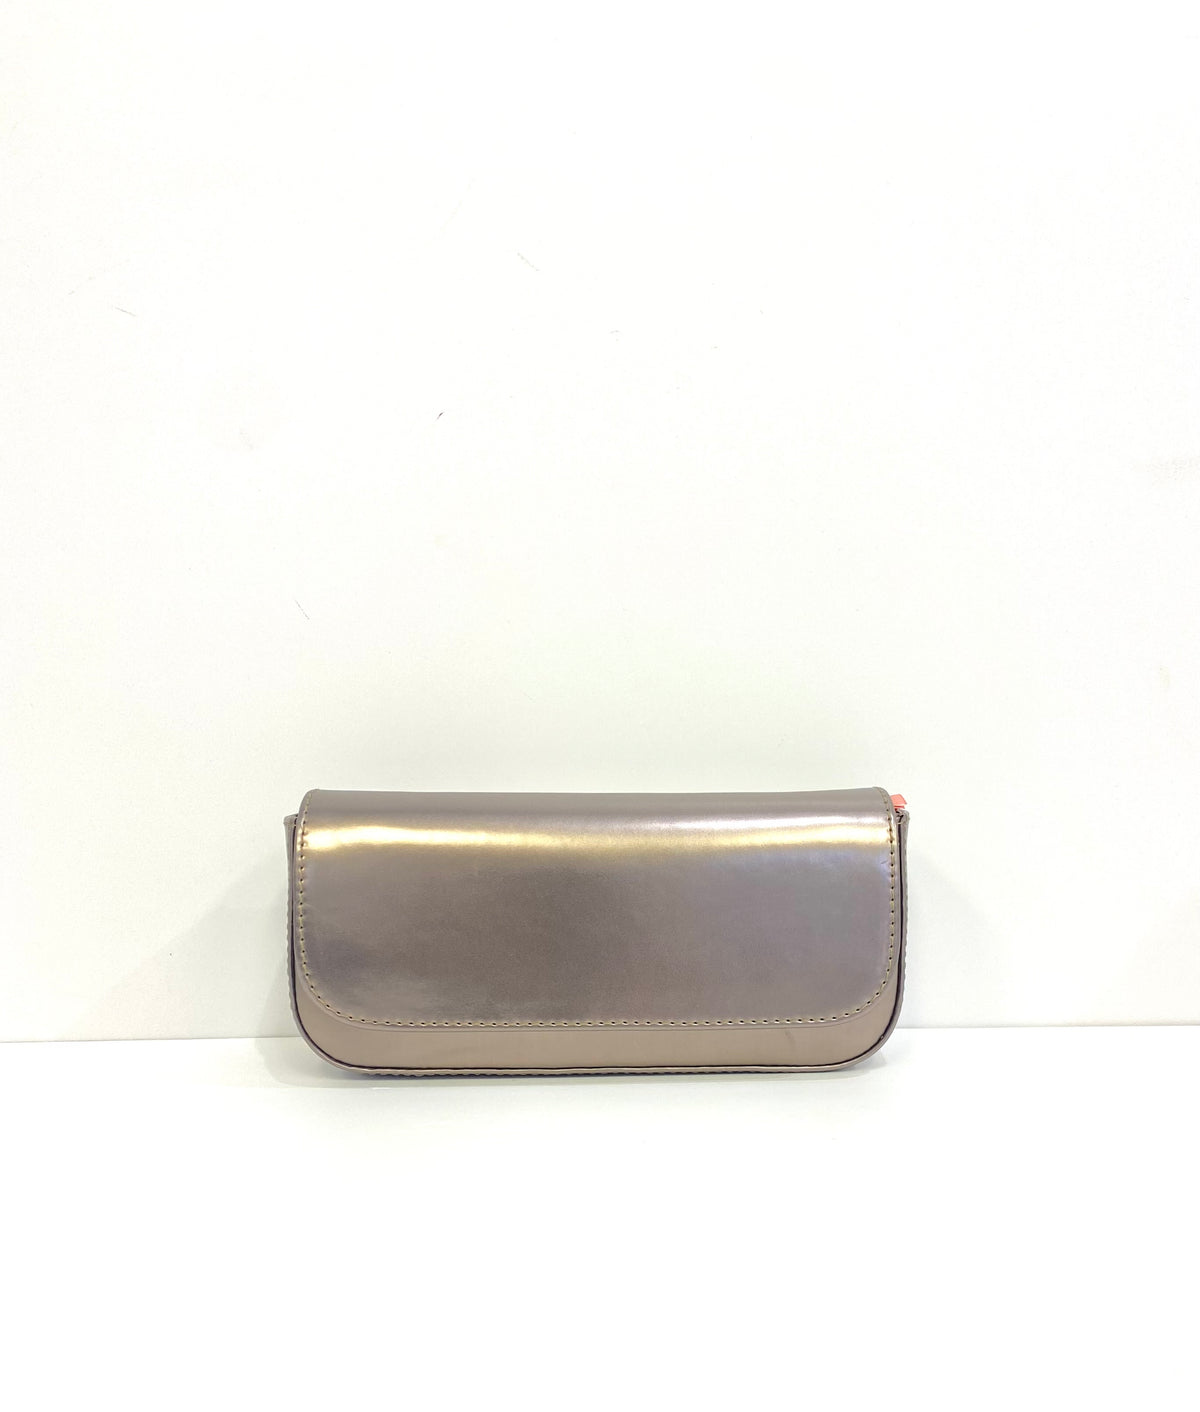 Unisa - ZDreamin Pewter Clutch Bag